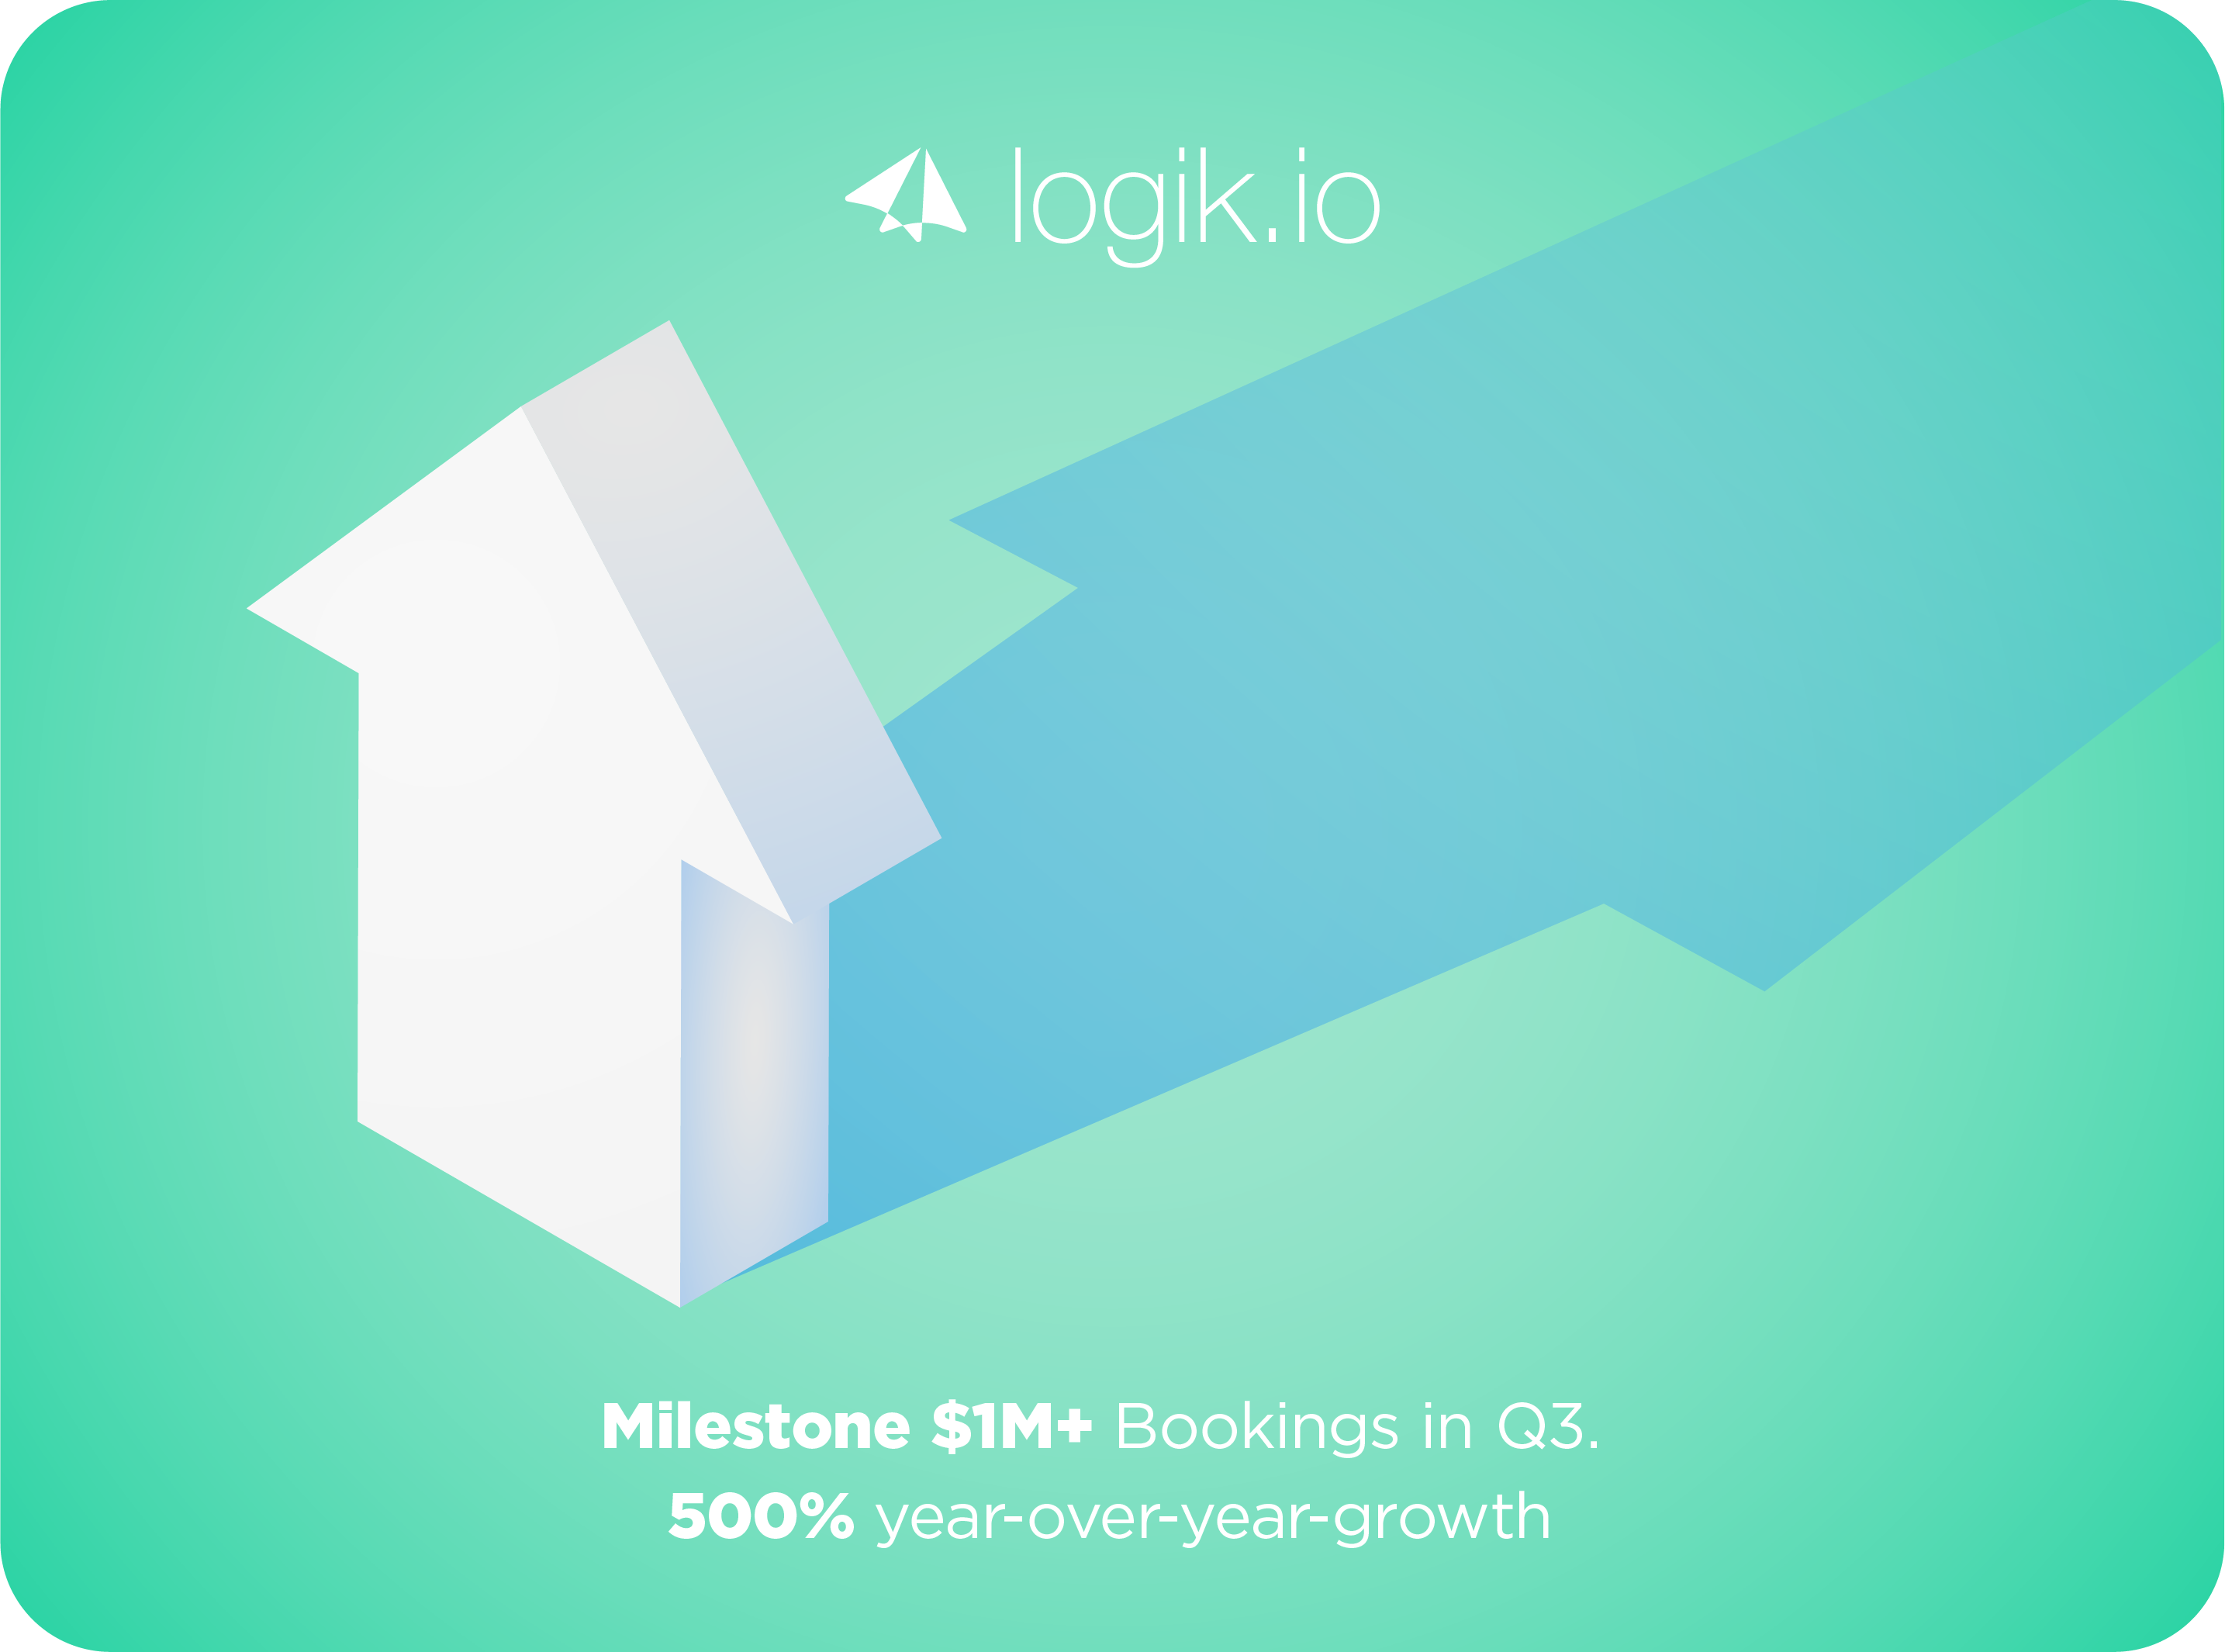 Logik.io Posts First $1M+ Quarter in ARR Bookings in Q3, Achieving Milestone in Just 4th Full Quarter of Selling